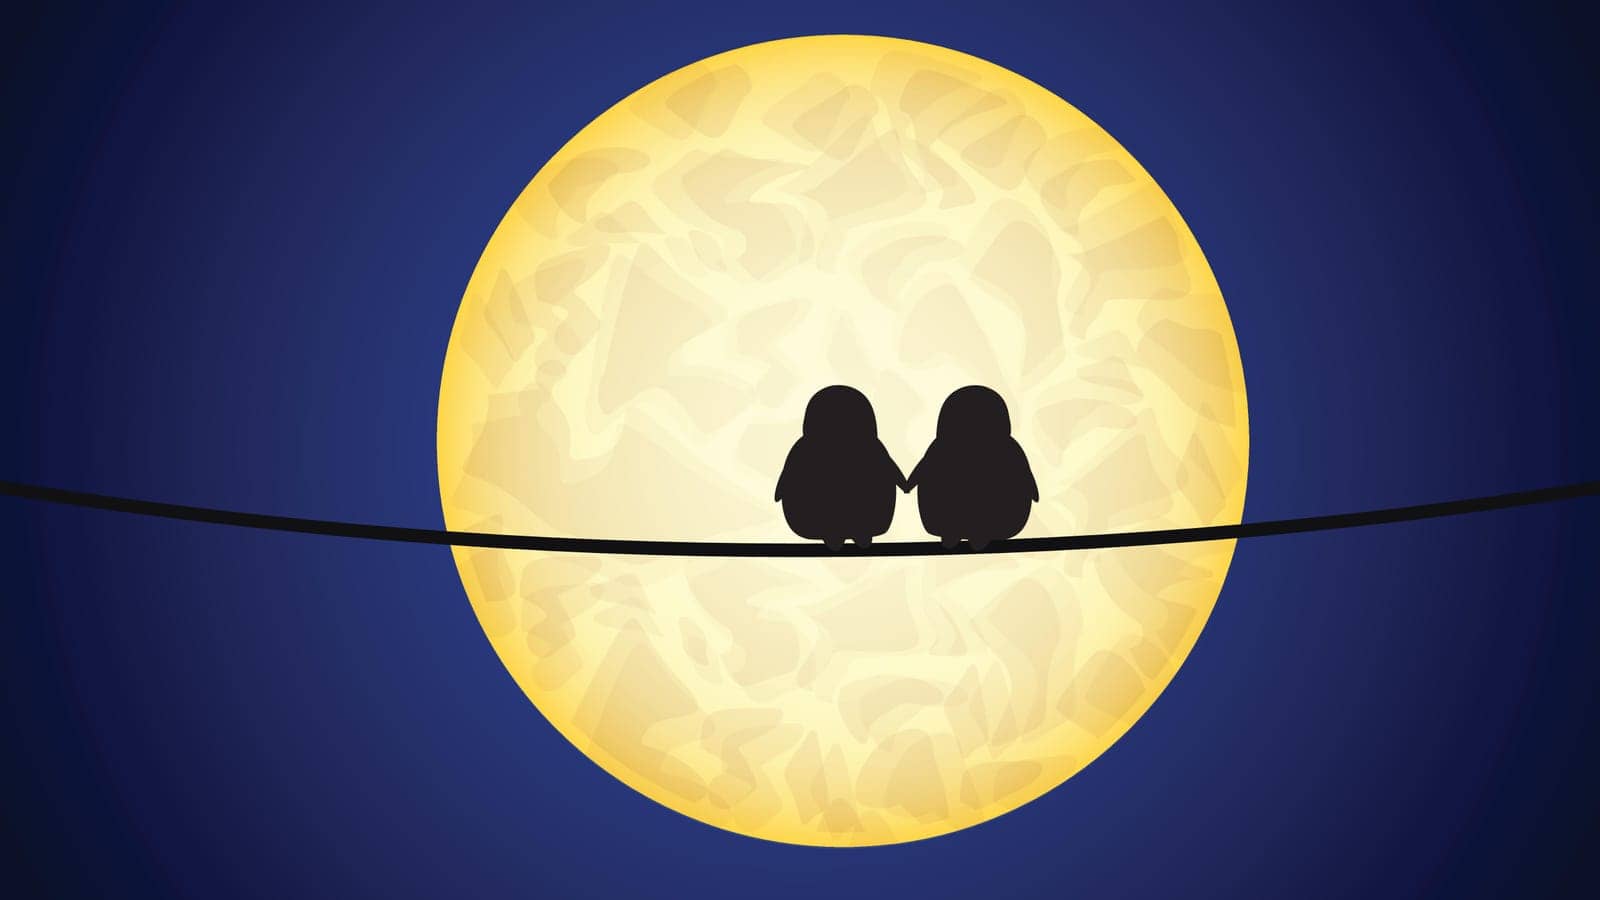 illustration of couple of birds sitting on wires on dark background with moon